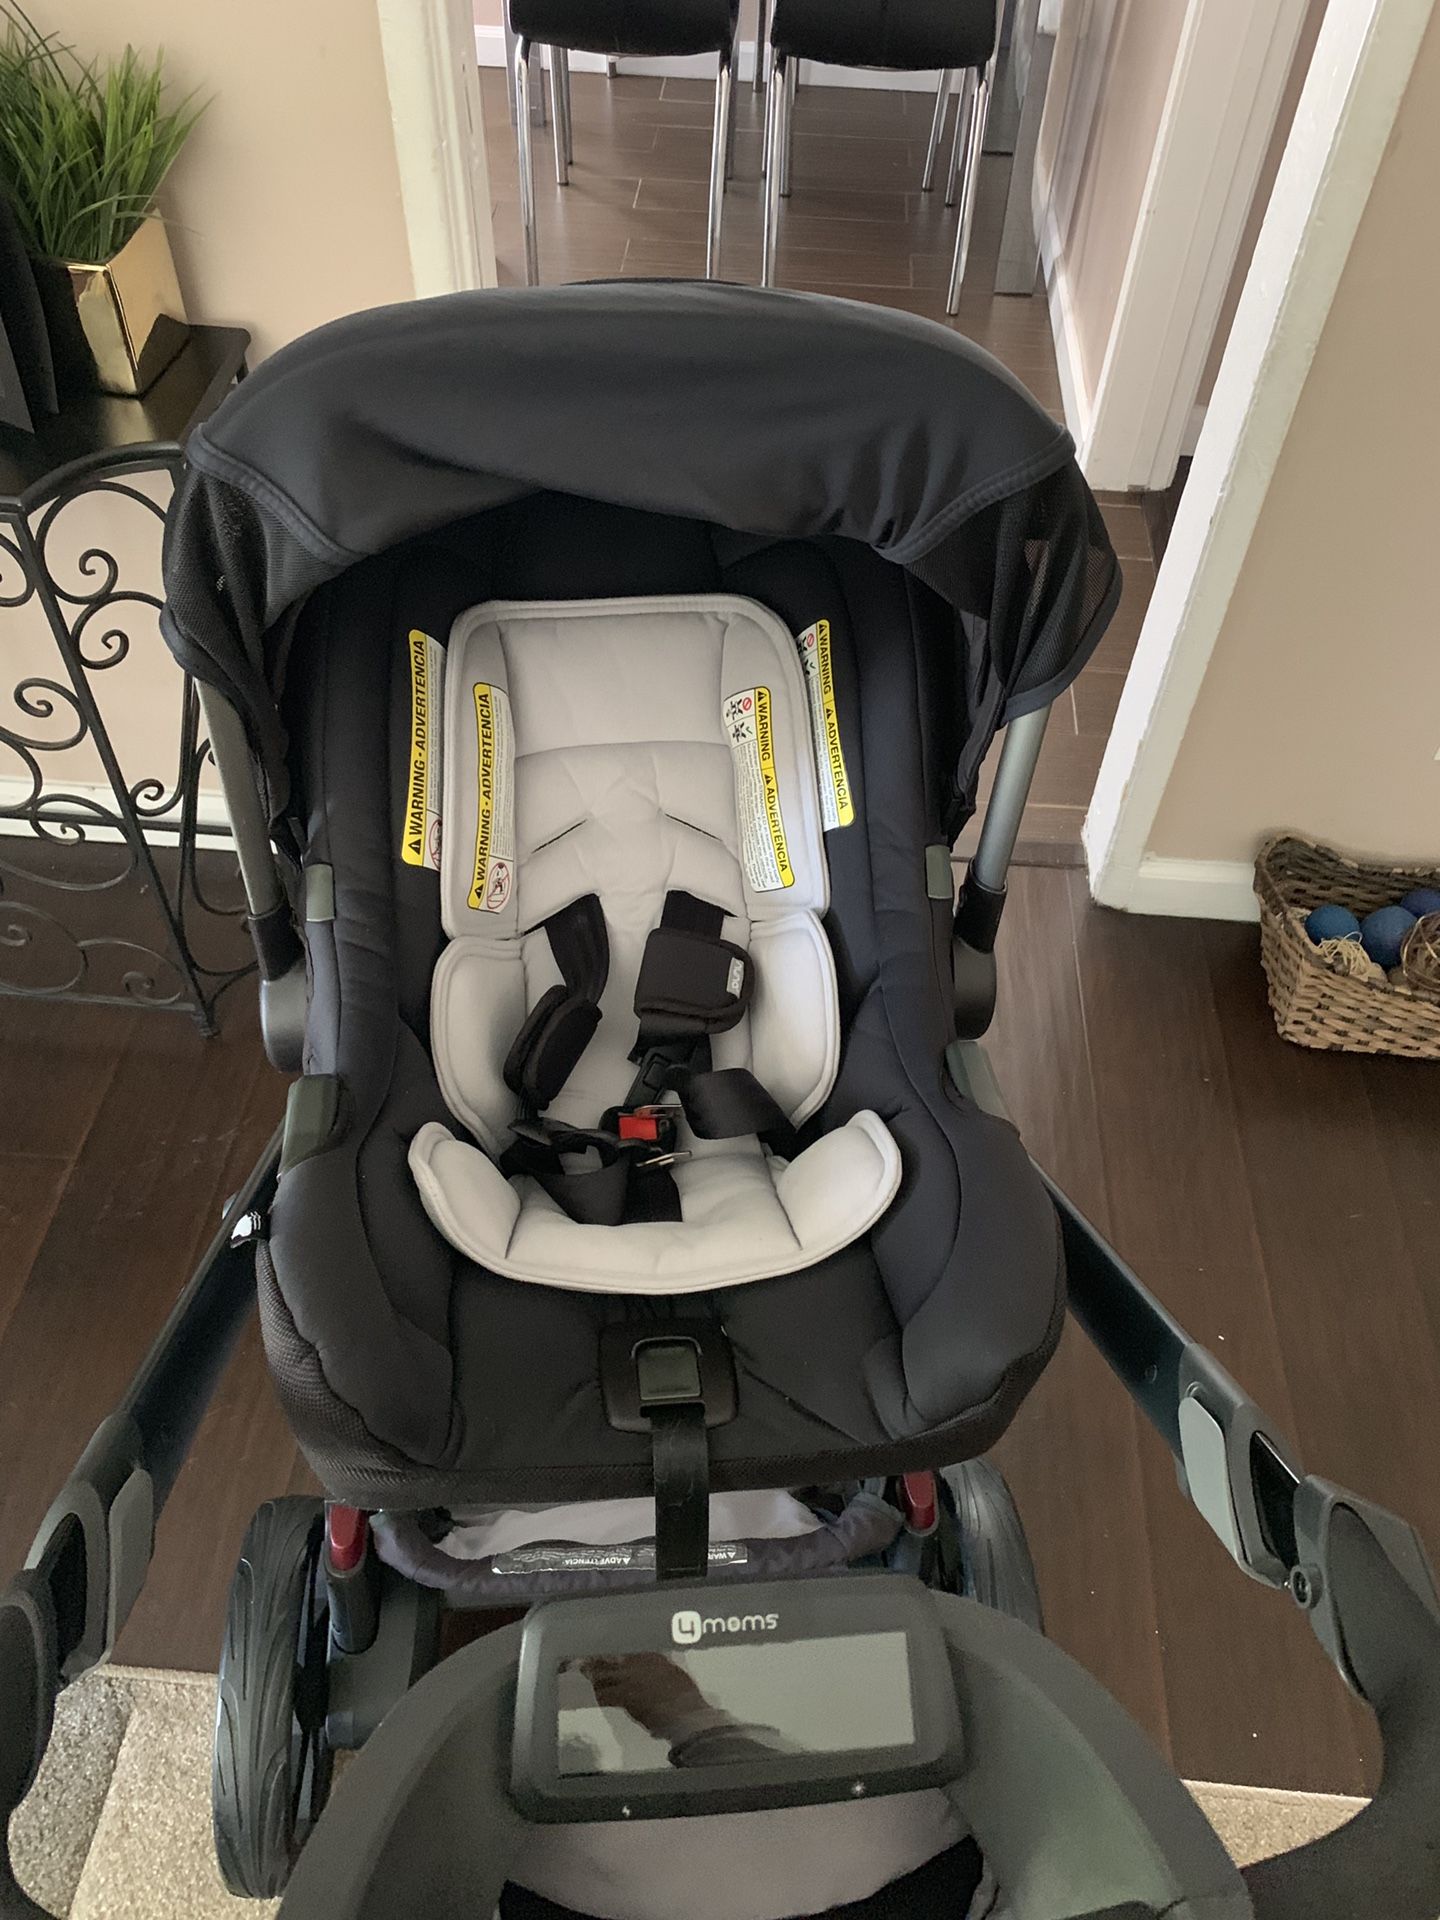 Stroller and car seat with base all together